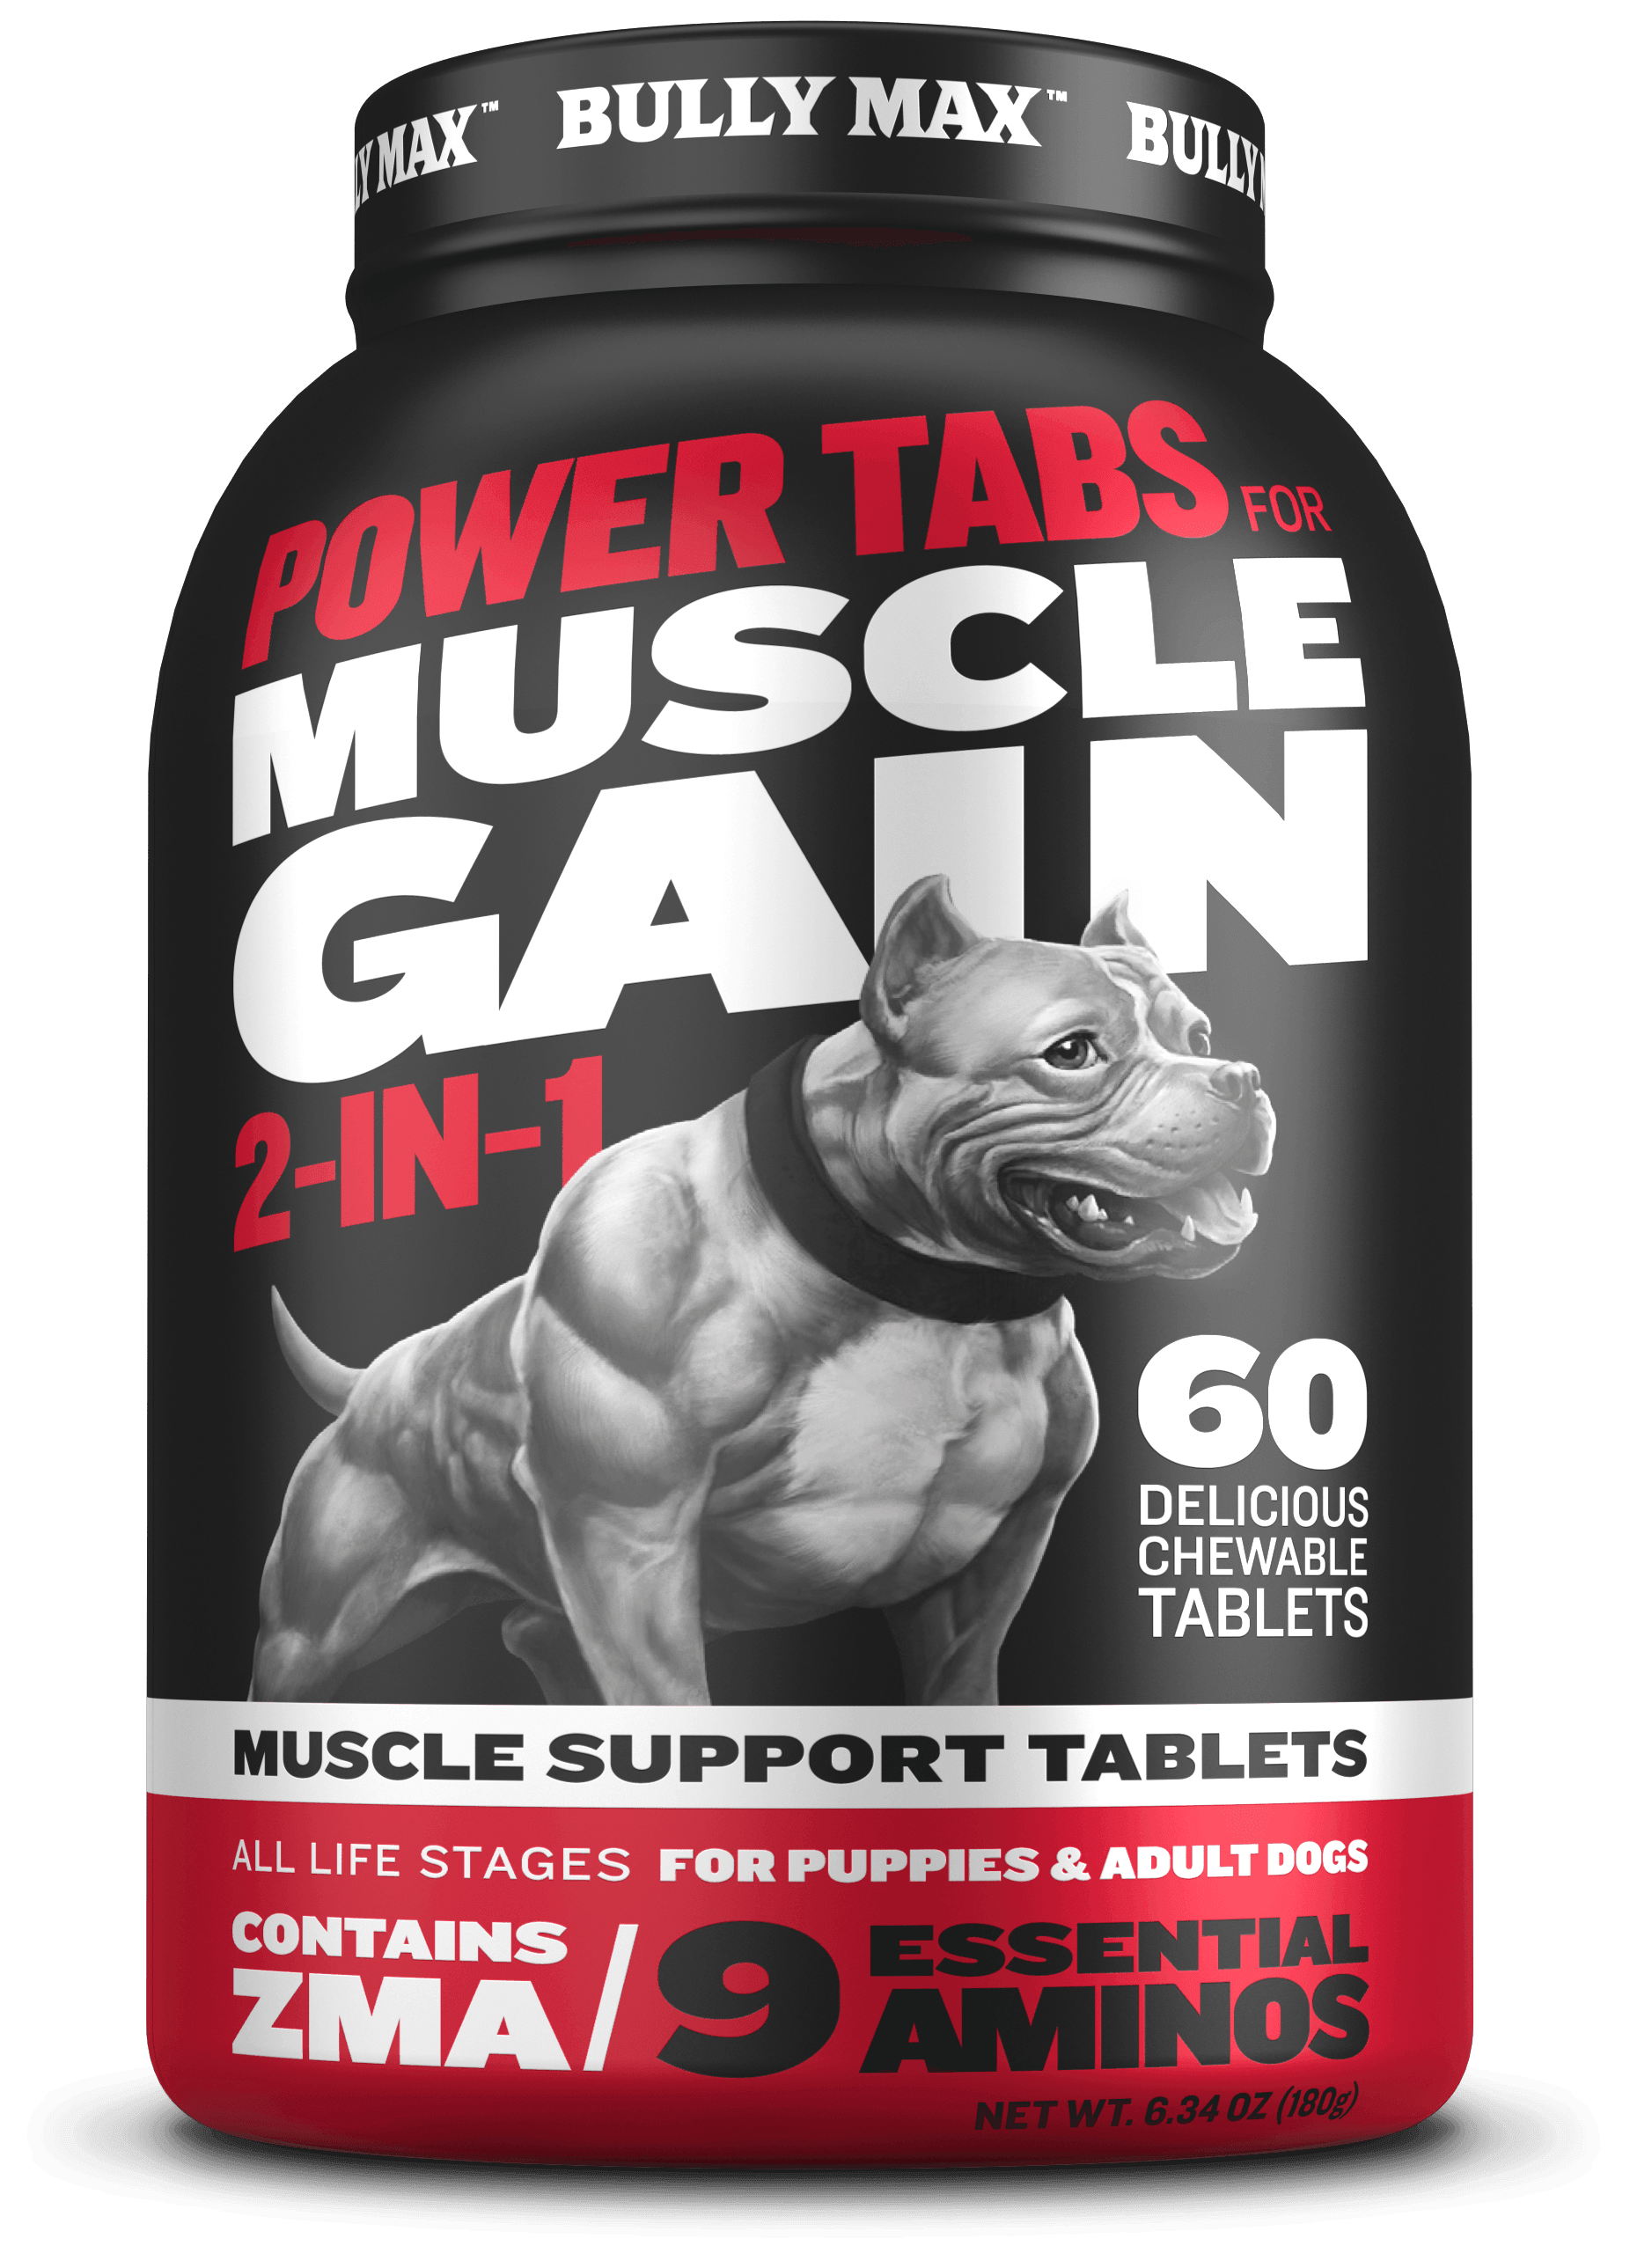 Bully Max Original Muscle Supplement 1